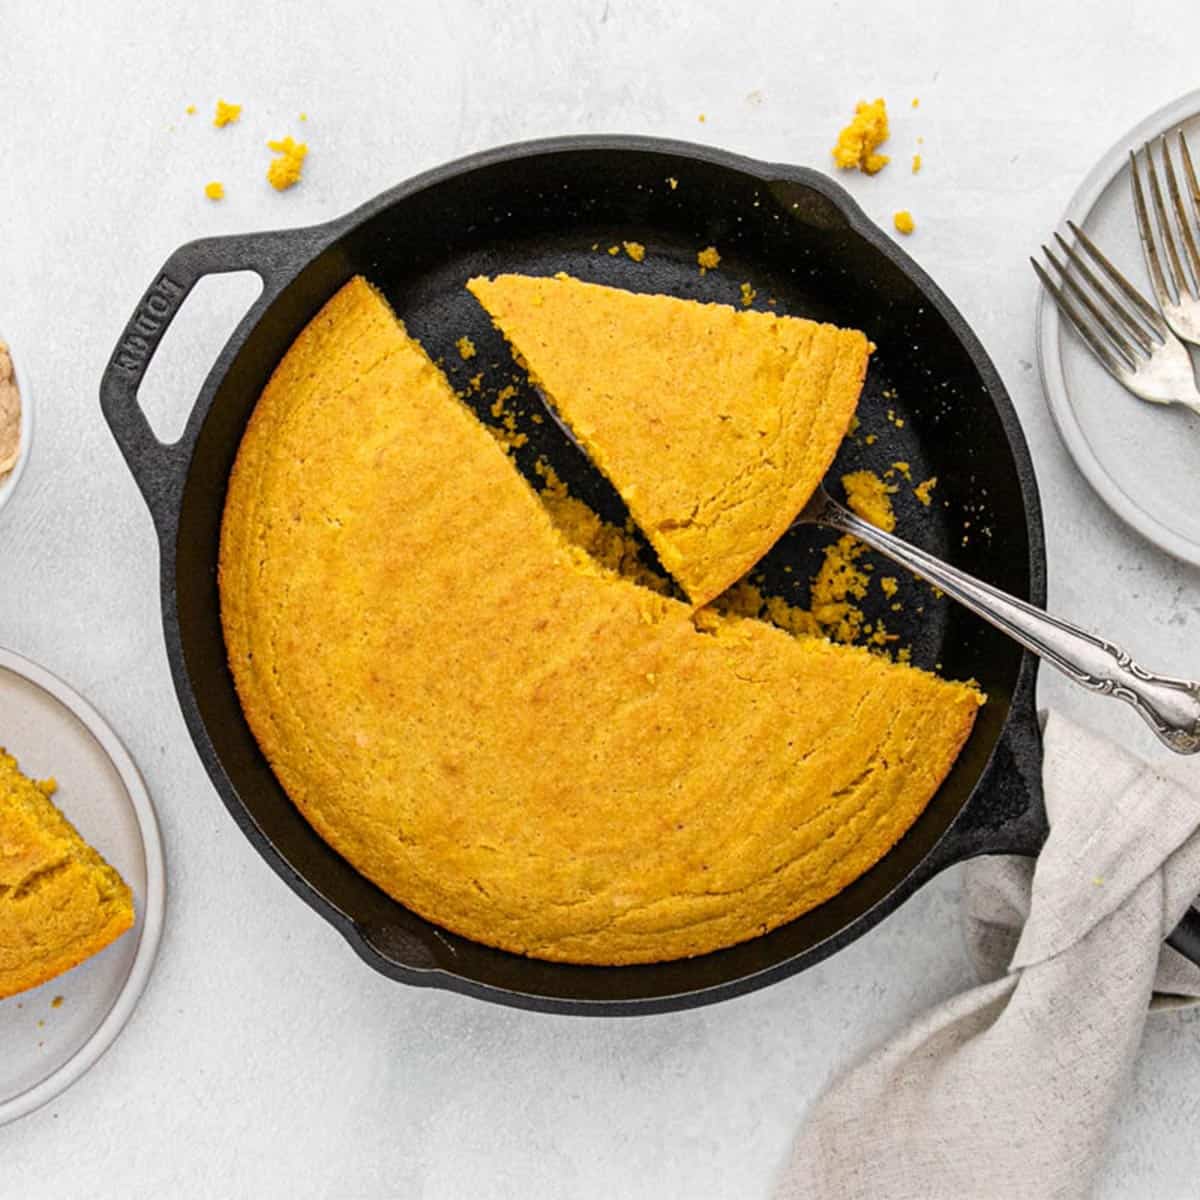 Every time I bake cornbread the bottom gets stuck to the pan (details in  comments) : r/Baking